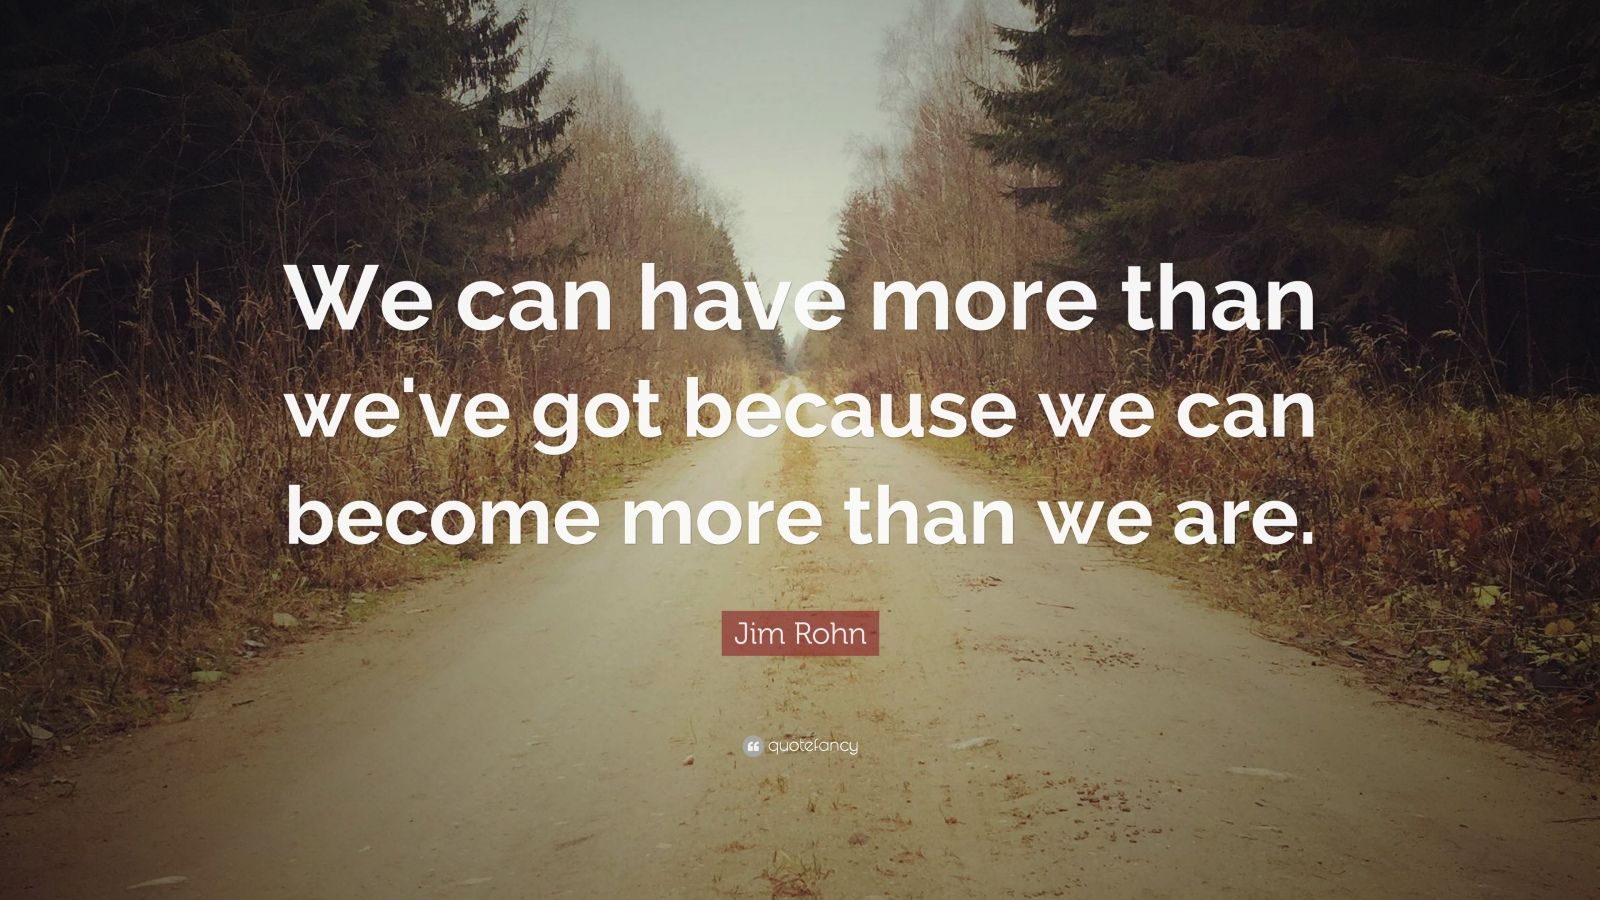 Jim Rohn Quote: “We can have more than we've got because we can become ...